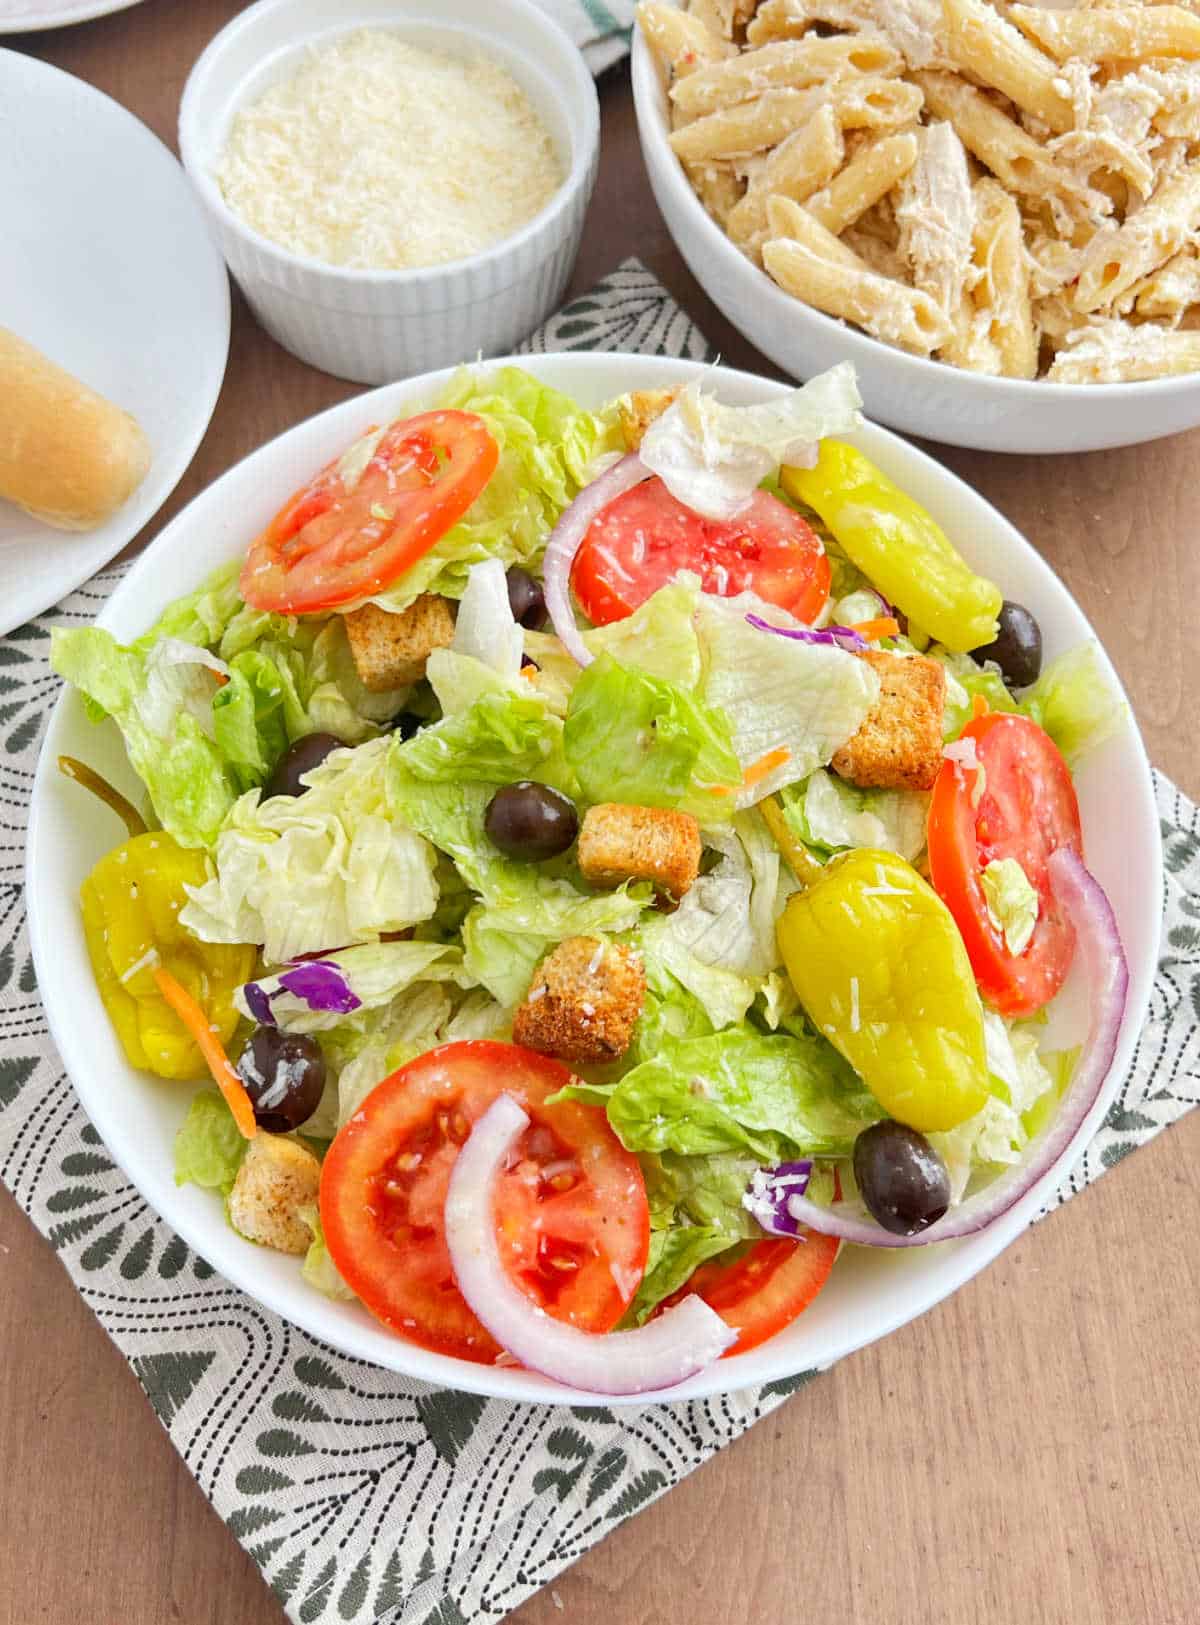 copycat olive garden salad in a bowl on the table with pasta and breadsticks.